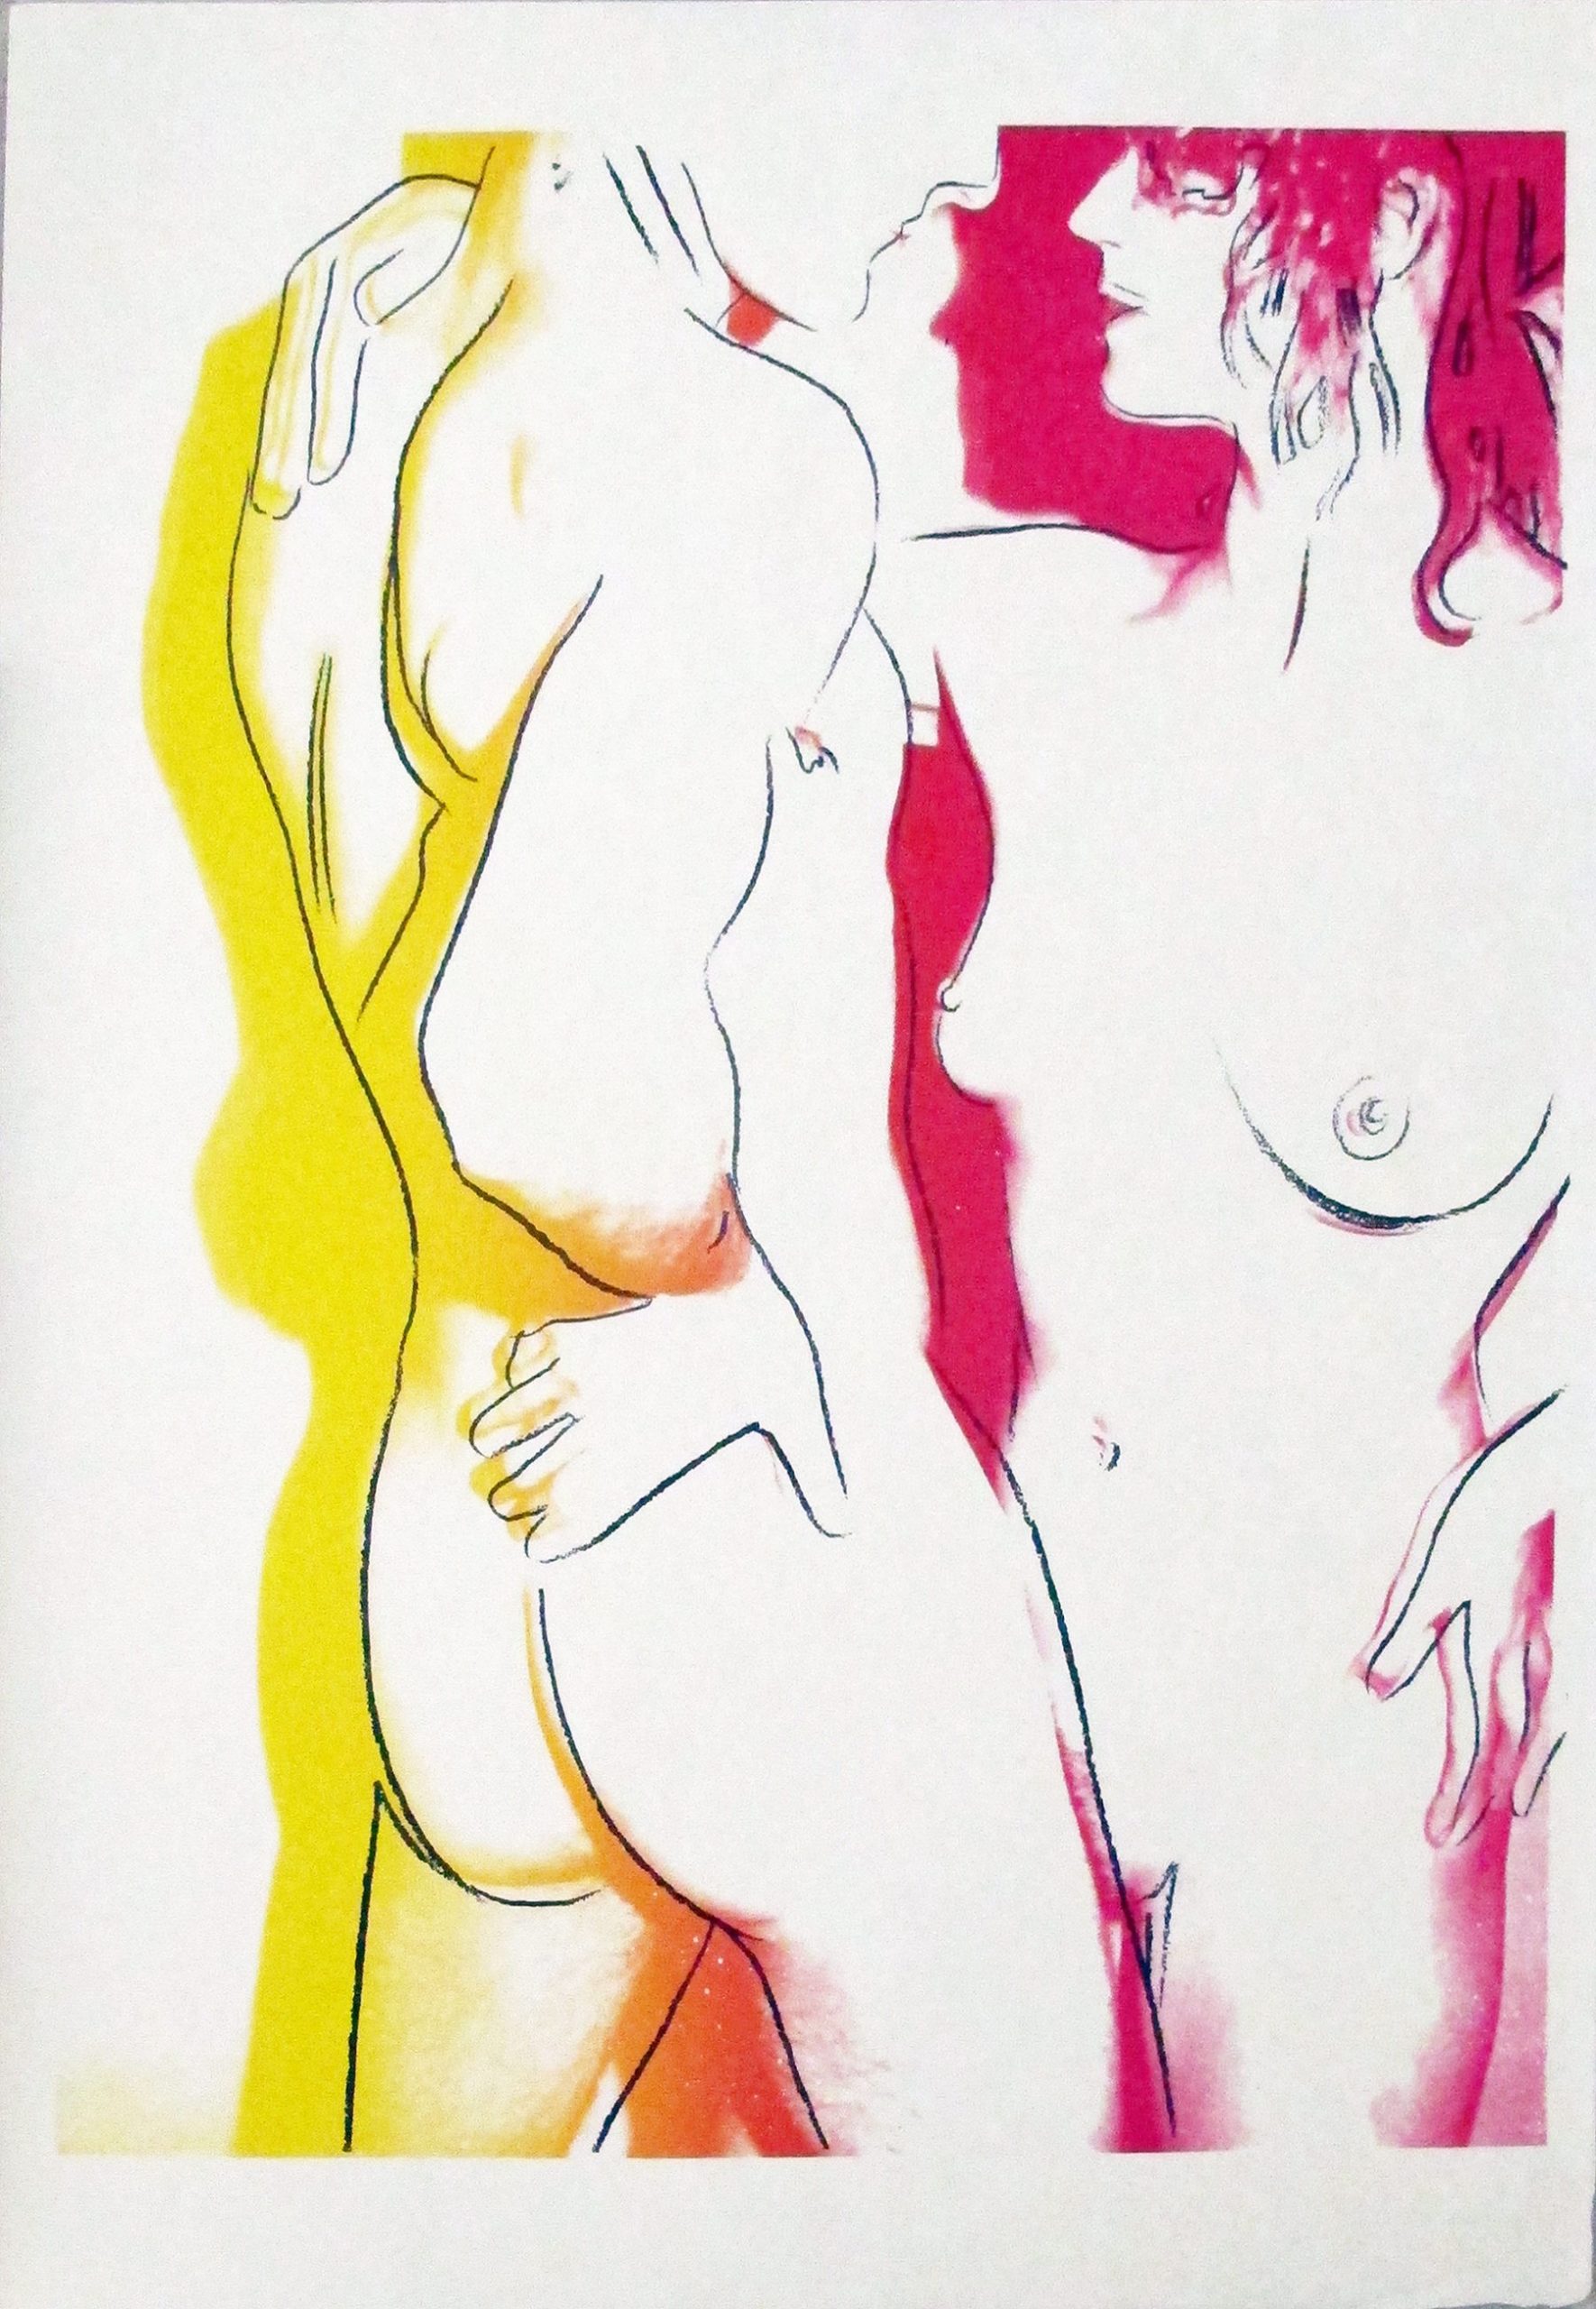 Andy Warhol | Love Variants | 1983 | Image of Artists' work.